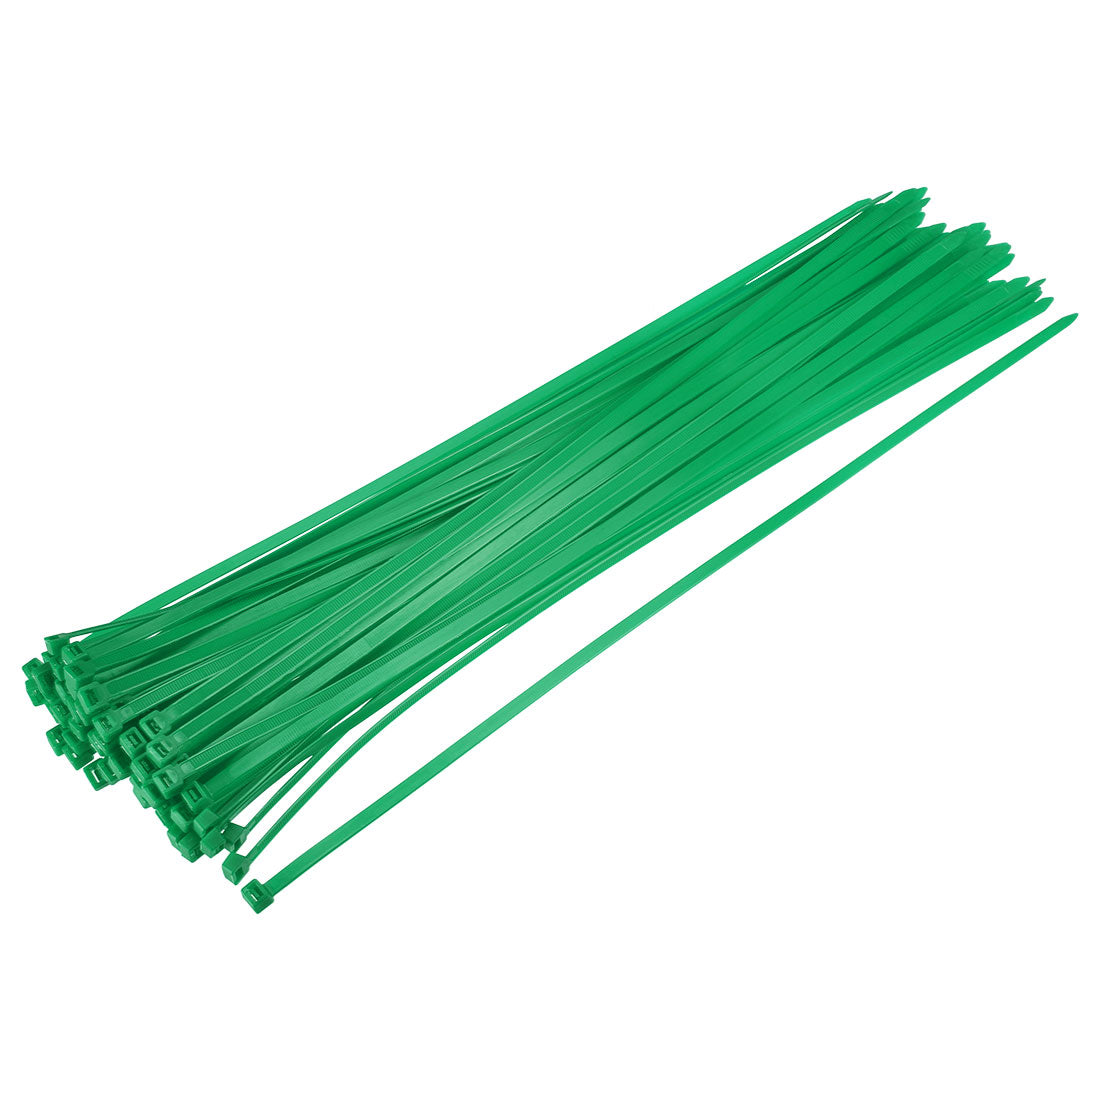 uxcell Uxcell Cable Zip Ties 500mmx4.8mm Self-Locking Nylon Tie Wraps Green 60pcs